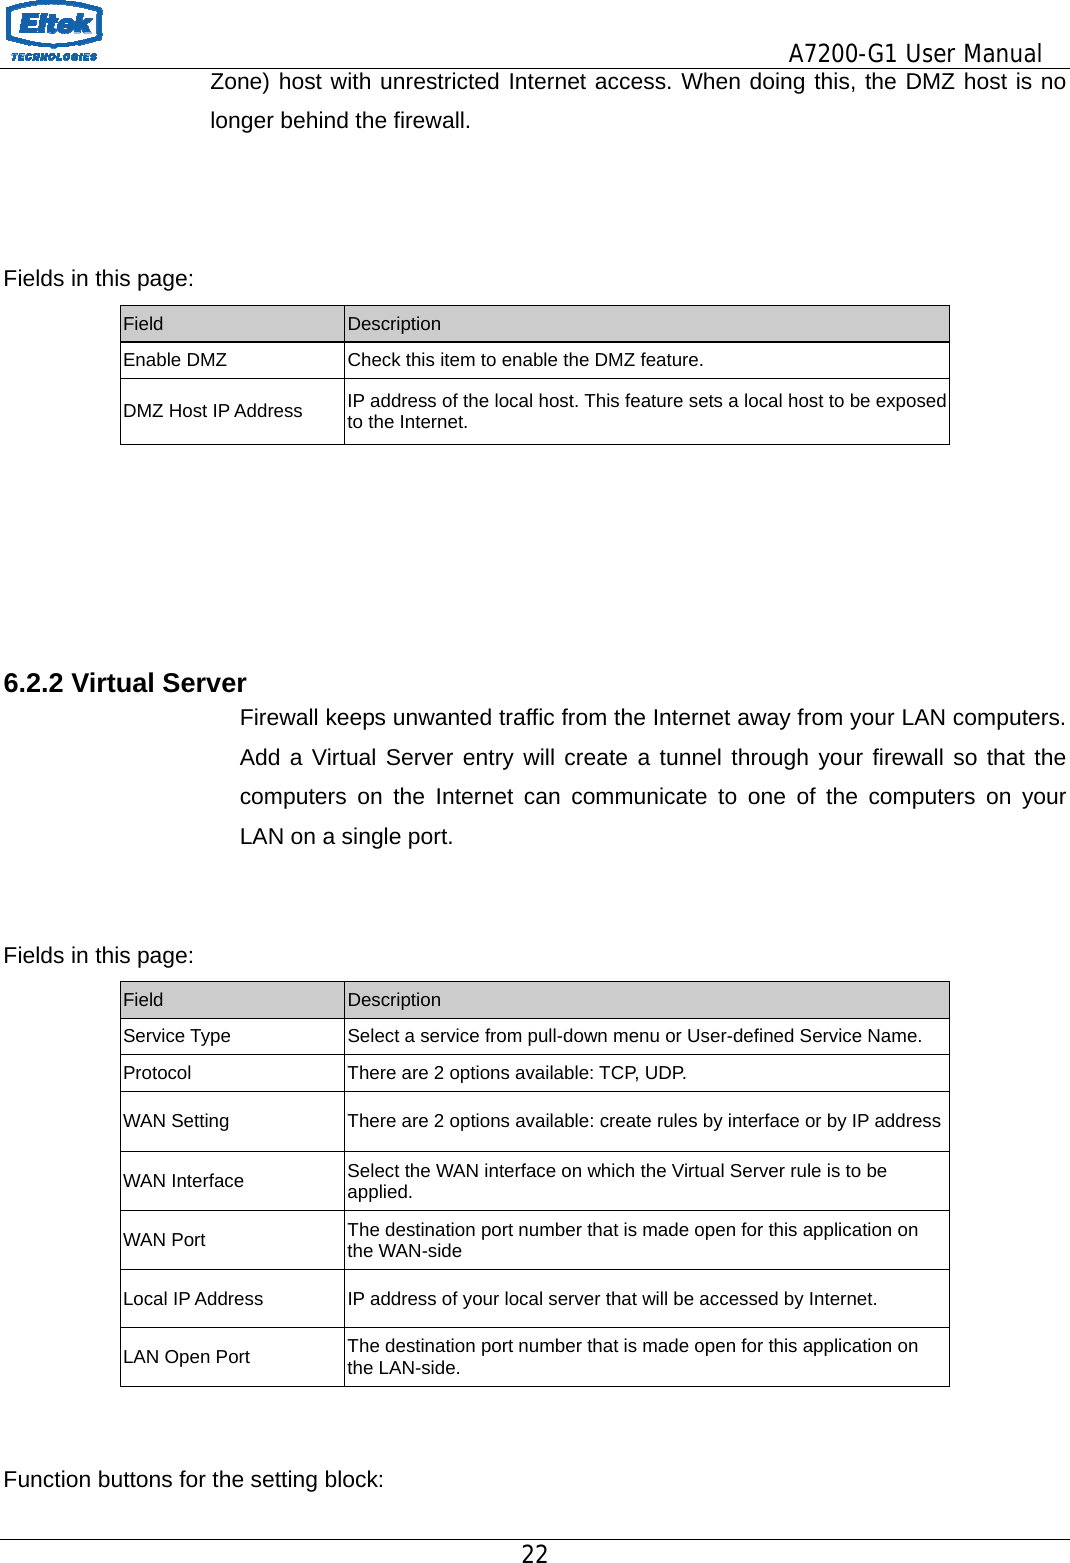                                         A7200-G1 User Manual 22  Zone) host with unrestricted Internet access. When doing this, the DMZ host is no longer behind the firewall.    Fields in this page: Field  Description Enable DMZ  Check this item to enable the DMZ feature. DMZ Host IP Address  IP address of the local host. This feature sets a local host to be exposed to the Internet.      6.2.2 Virtual Server Firewall keeps unwanted traffic from the Internet away from your LAN computers. Add a Virtual Server entry will create a tunnel through your firewall so that the computers on the Internet can communicate to one of the computers on your LAN on a single port.   Fields in this page: Field  Description Service Type  Select a service from pull-down menu or User-defined Service Name. Protocol  There are 2 options available: TCP, UDP. WAN Setting  There are 2 options available: create rules by interface or by IP addressWAN Interface  Select the WAN interface on which the Virtual Server rule is to be applied. WAN Port  The destination port number that is made open for this application on the WAN-side Local IP Address  IP address of your local server that will be accessed by Internet. LAN Open Port  The destination port number that is made open for this application on the LAN-side.   Function buttons for the setting block:  